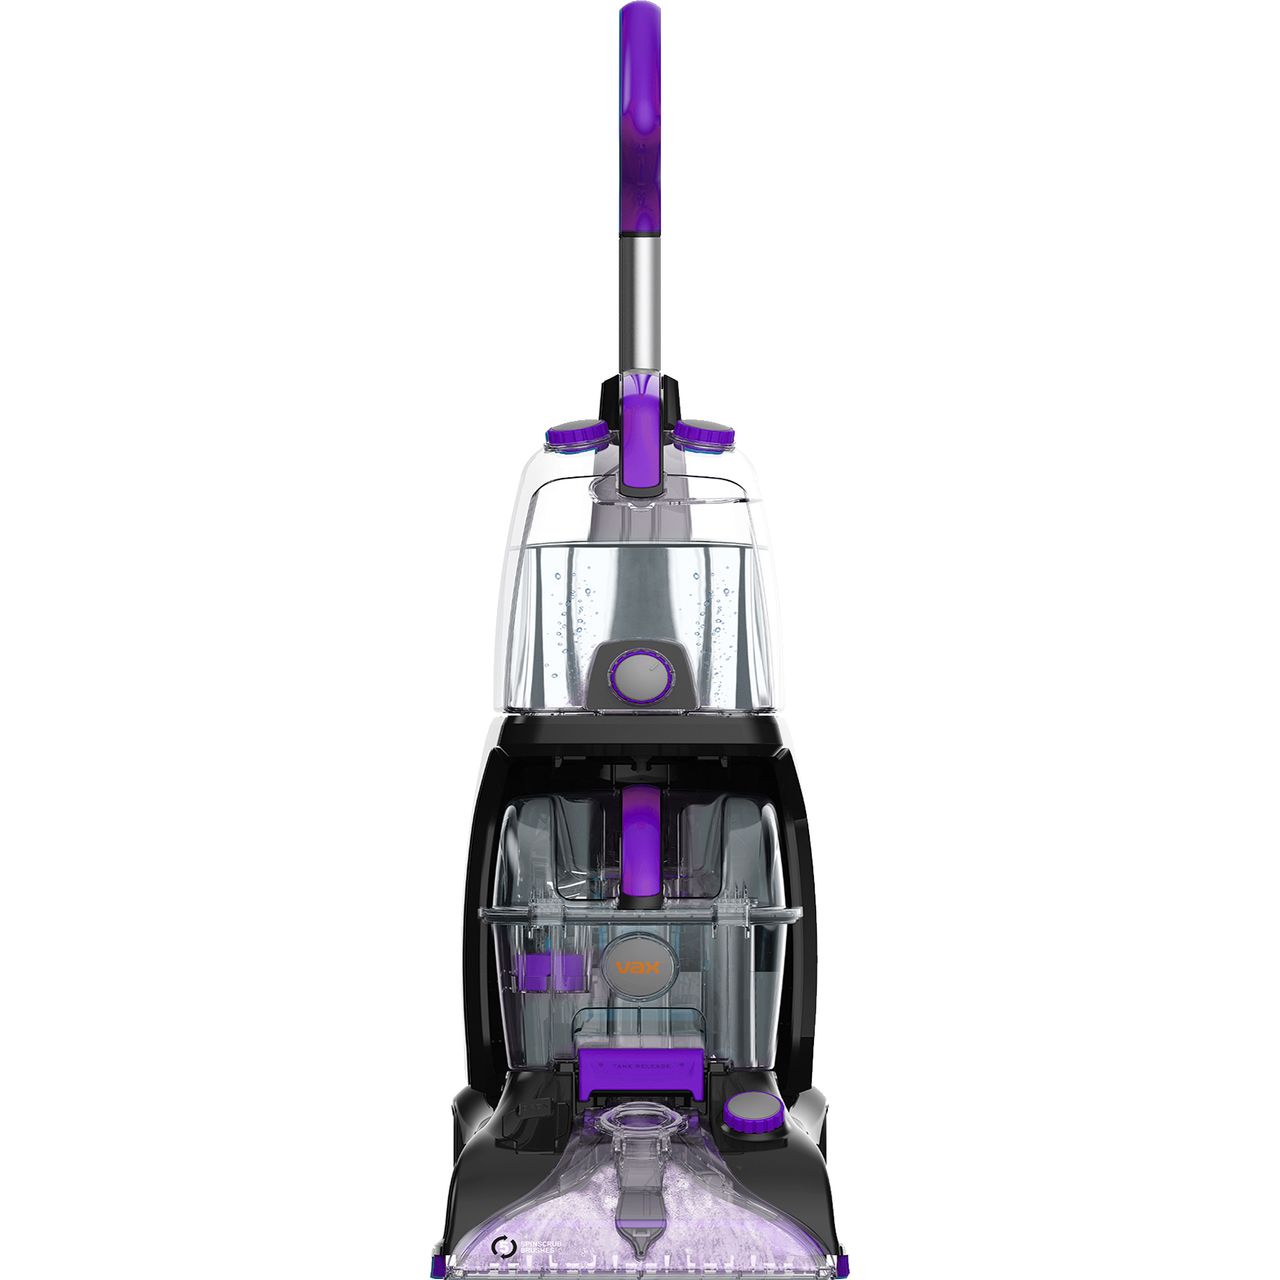 Vax Rapid Power Advance CDCW-RPXR Carpet Cleaner Review